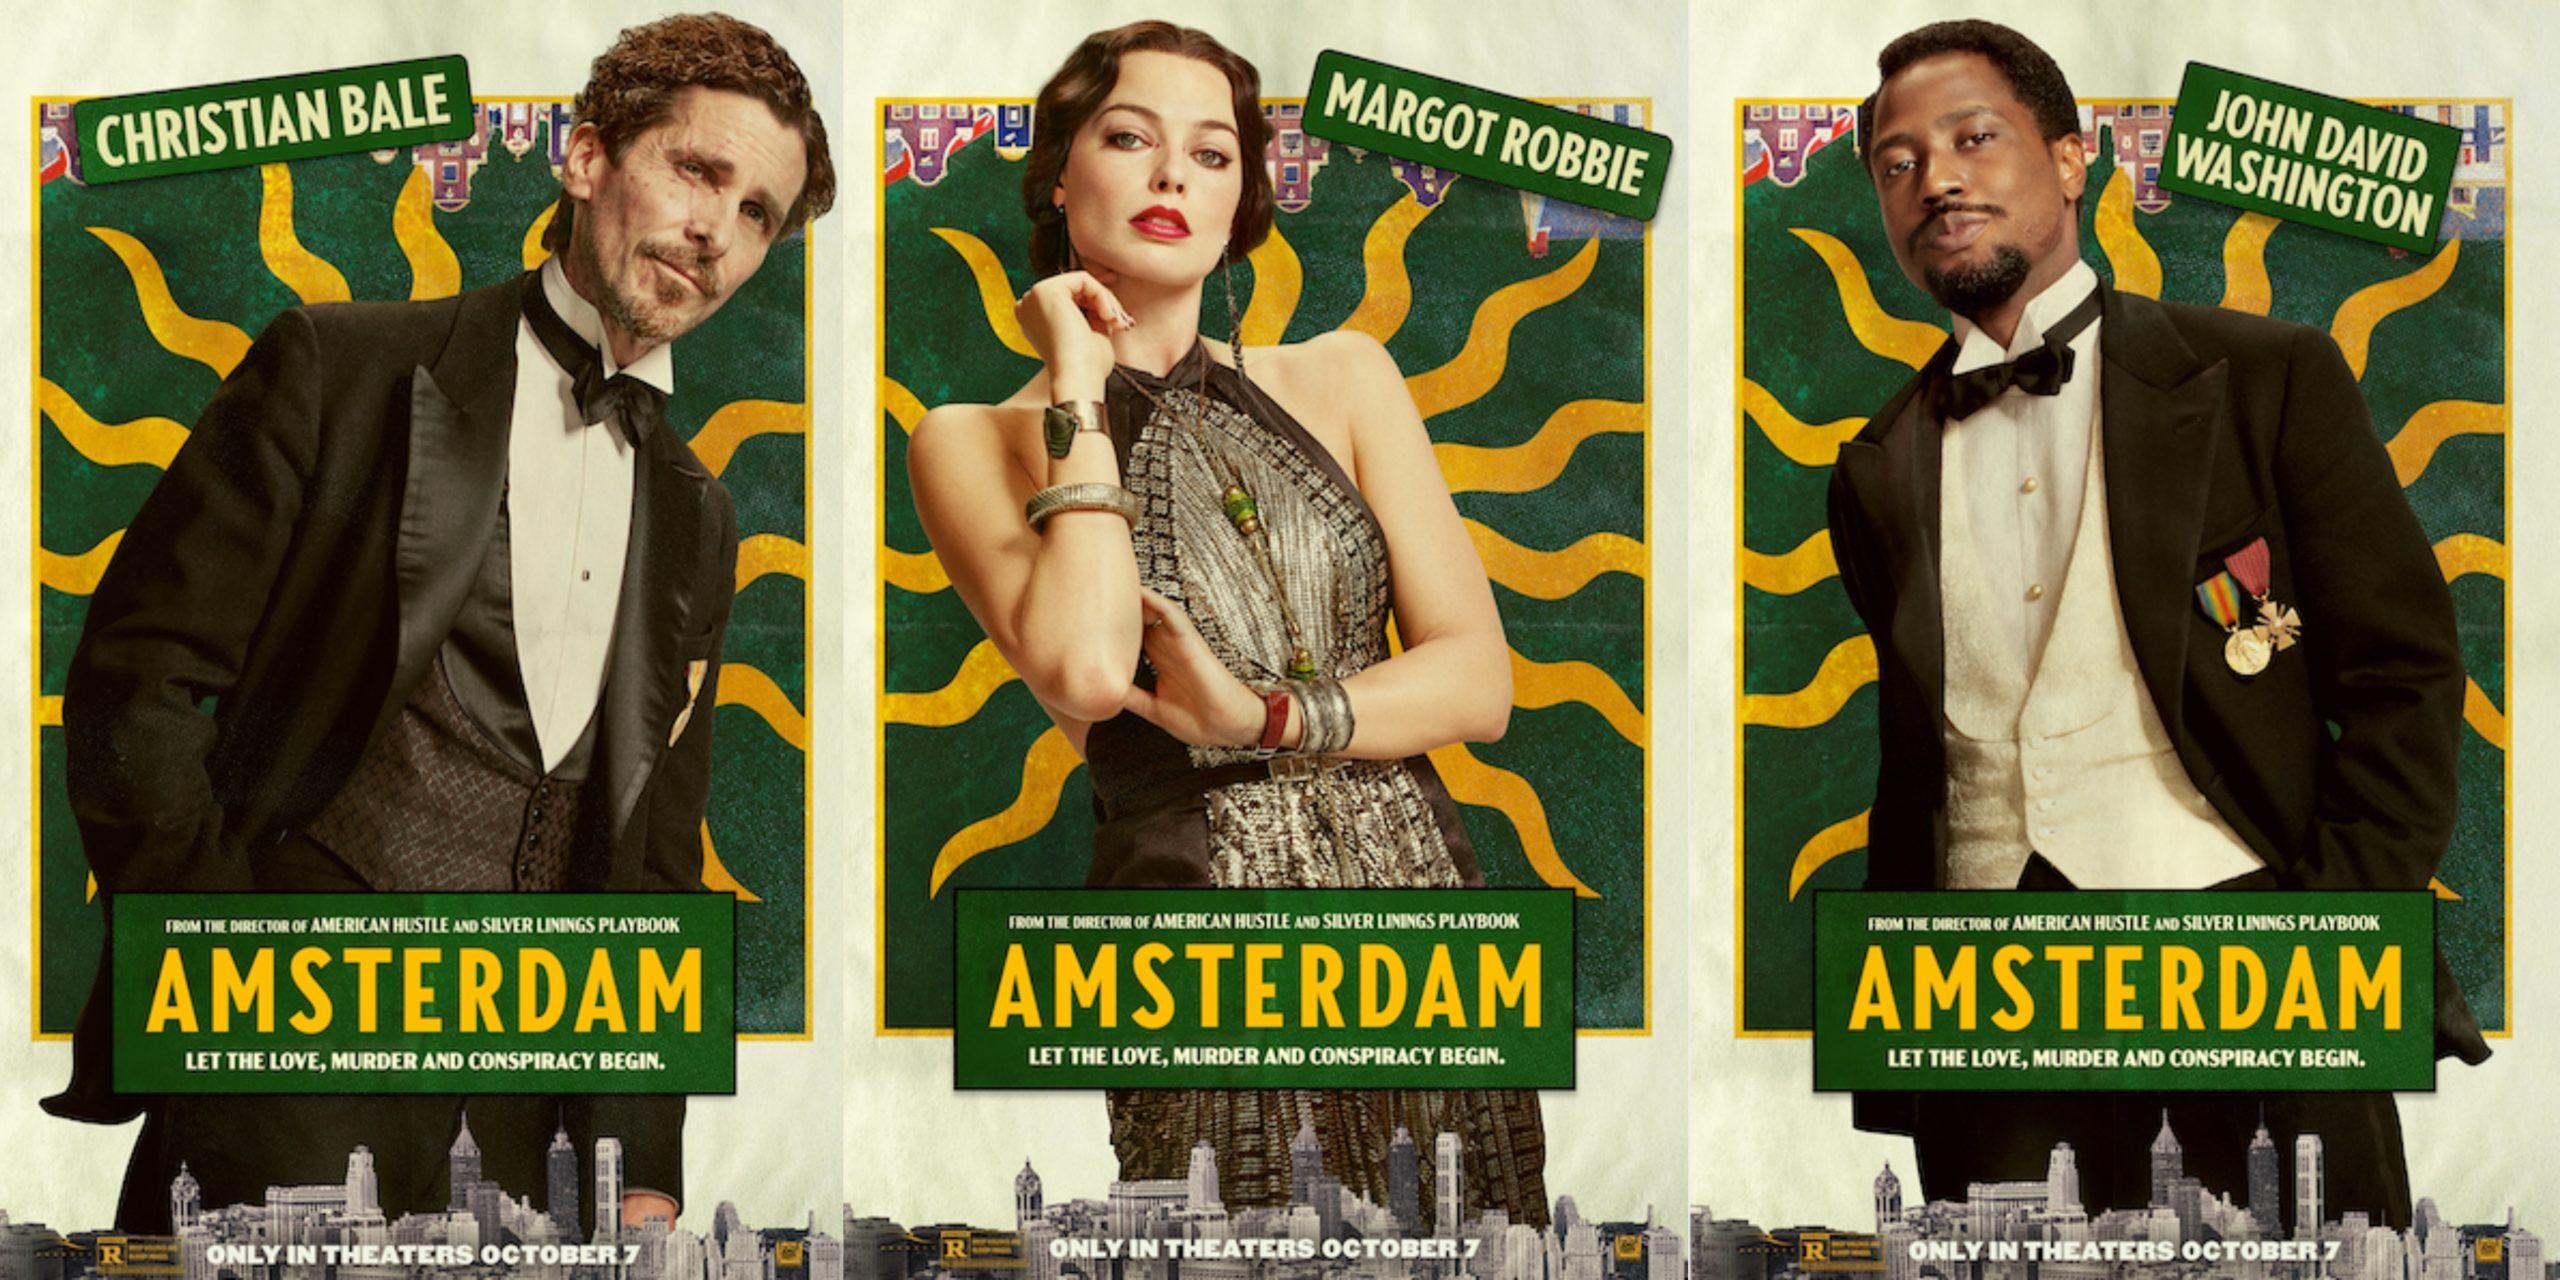 See The New Character Poster For The Movie “Amsterdam”. #AmsterdamMovie @AmsterdamMovie @20thcentury